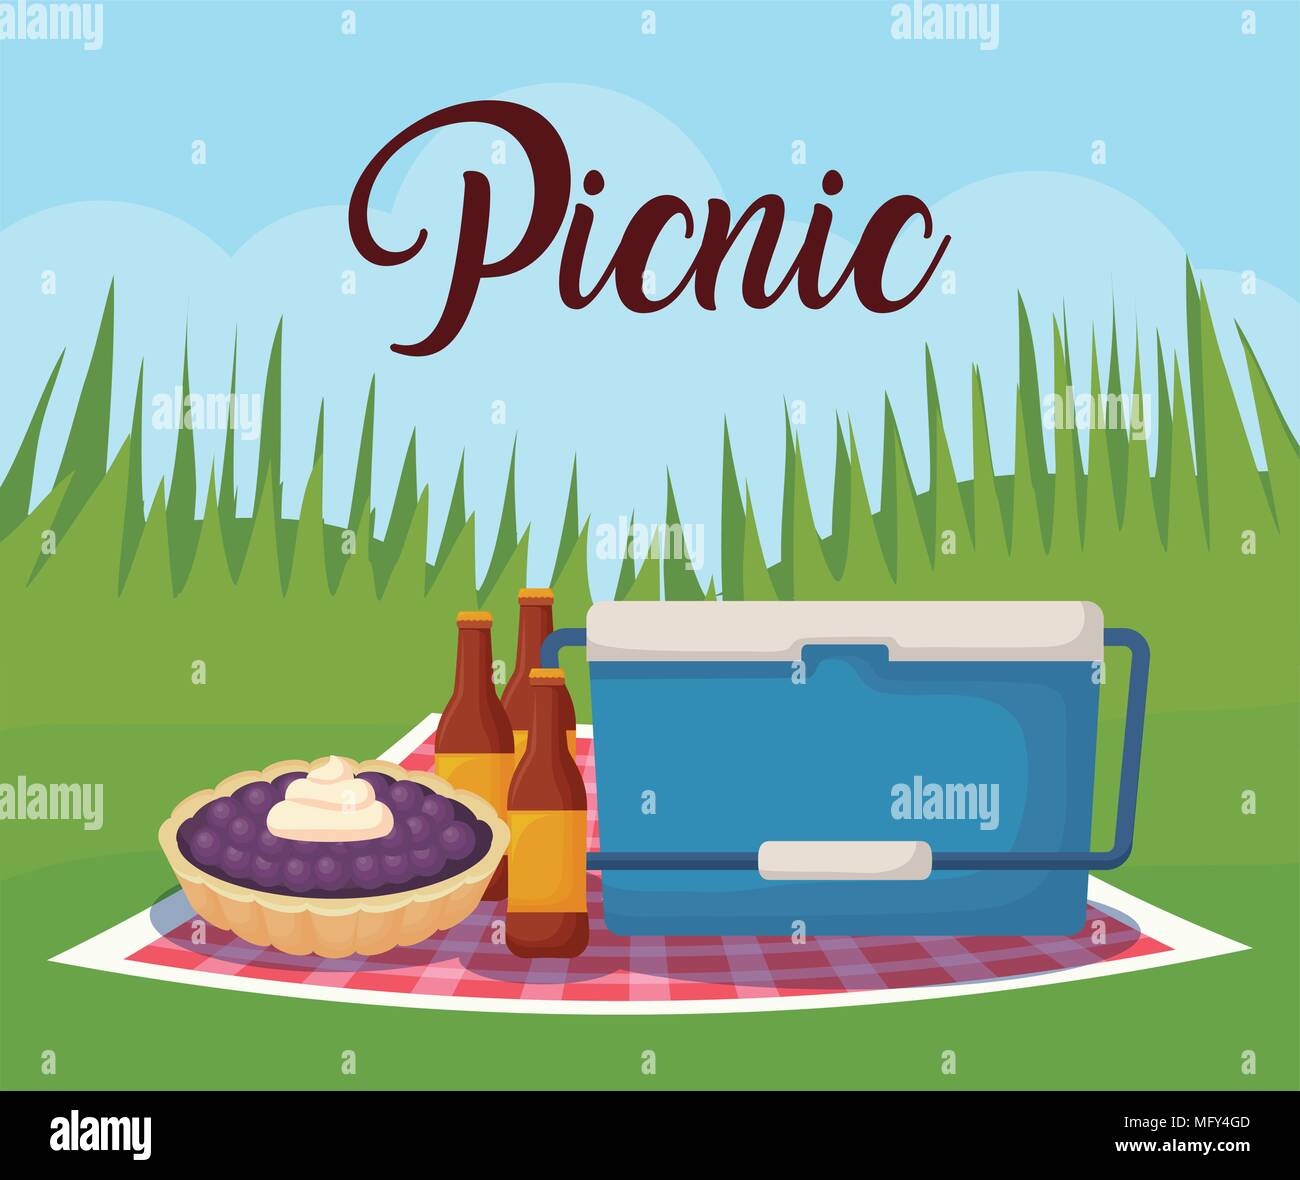 picnic landscape concept with cooler and beer bottles, colorful design. vector illustration Stock Vector